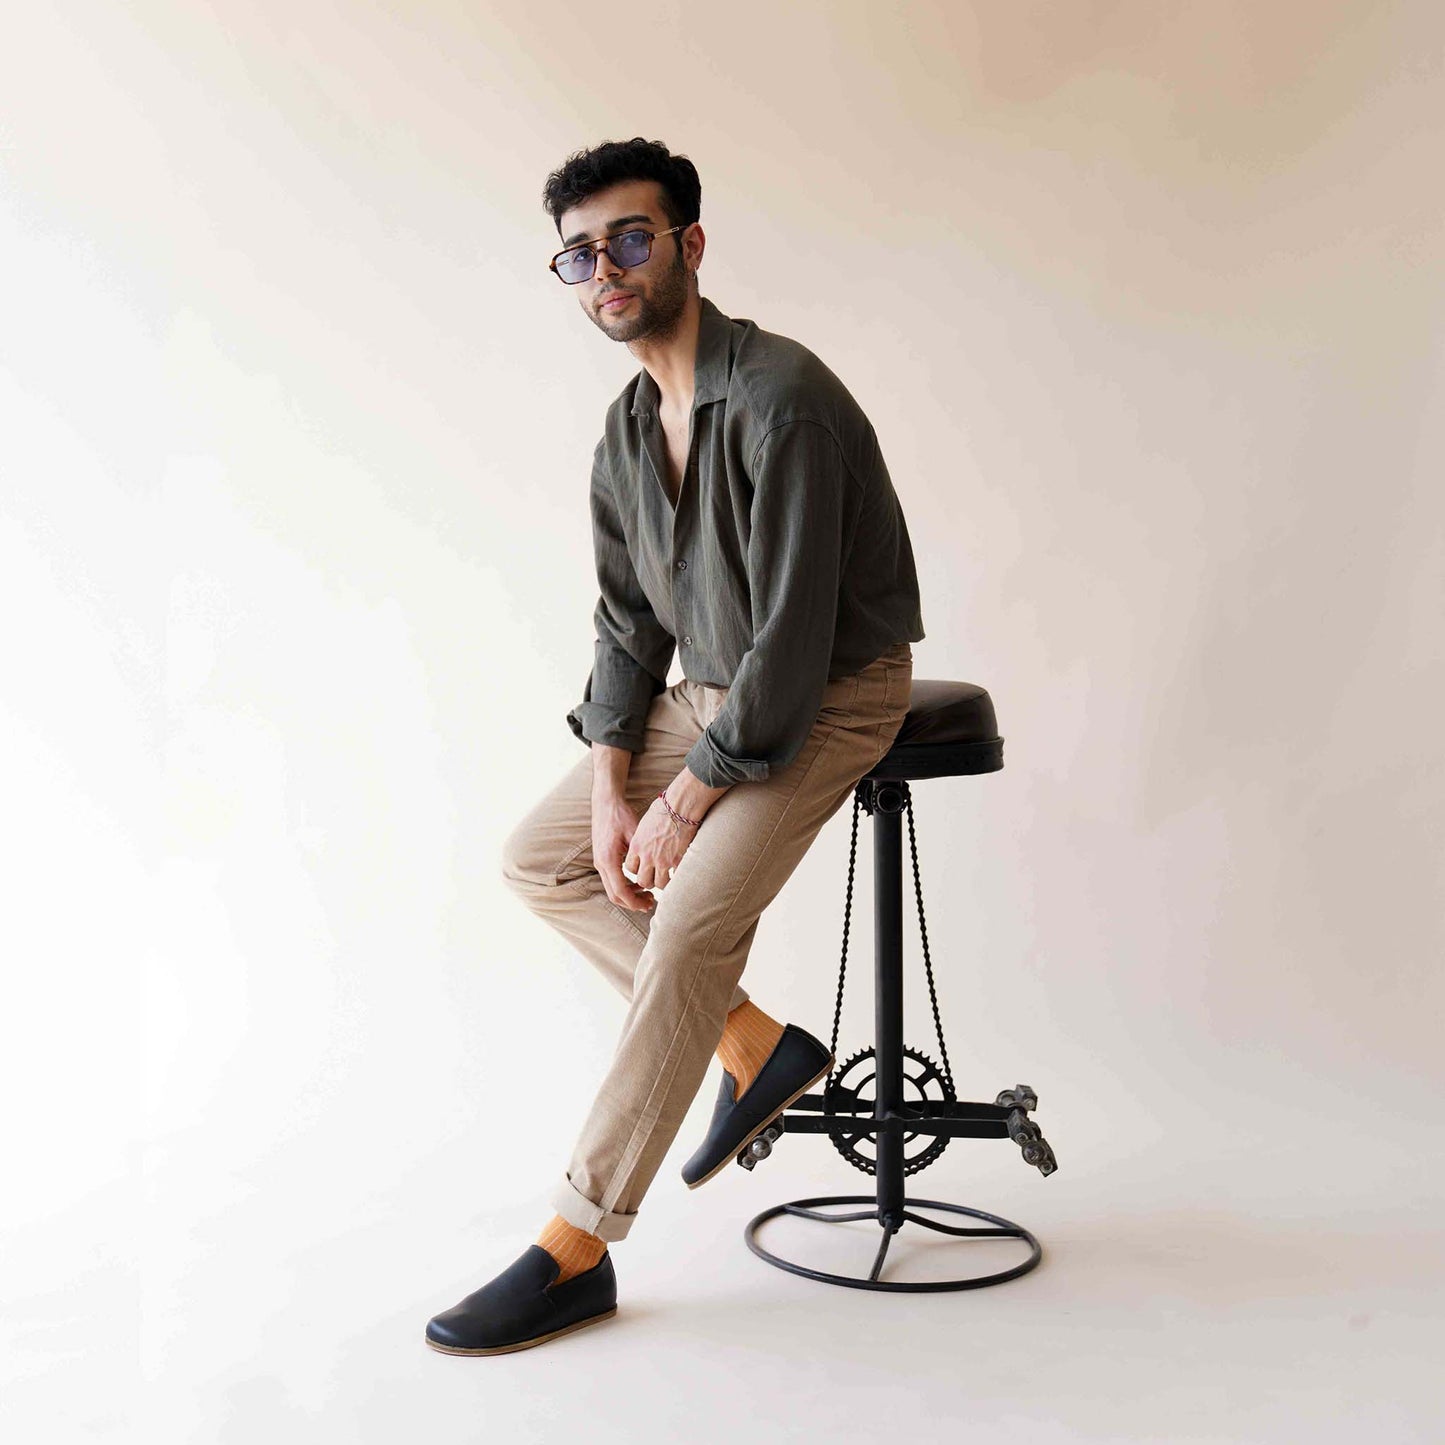 Model wearing Aeolia Leather Barefoot Men's Loafers in black, sitting on a stool in stylish casual attire. Shop at pelanir.com!